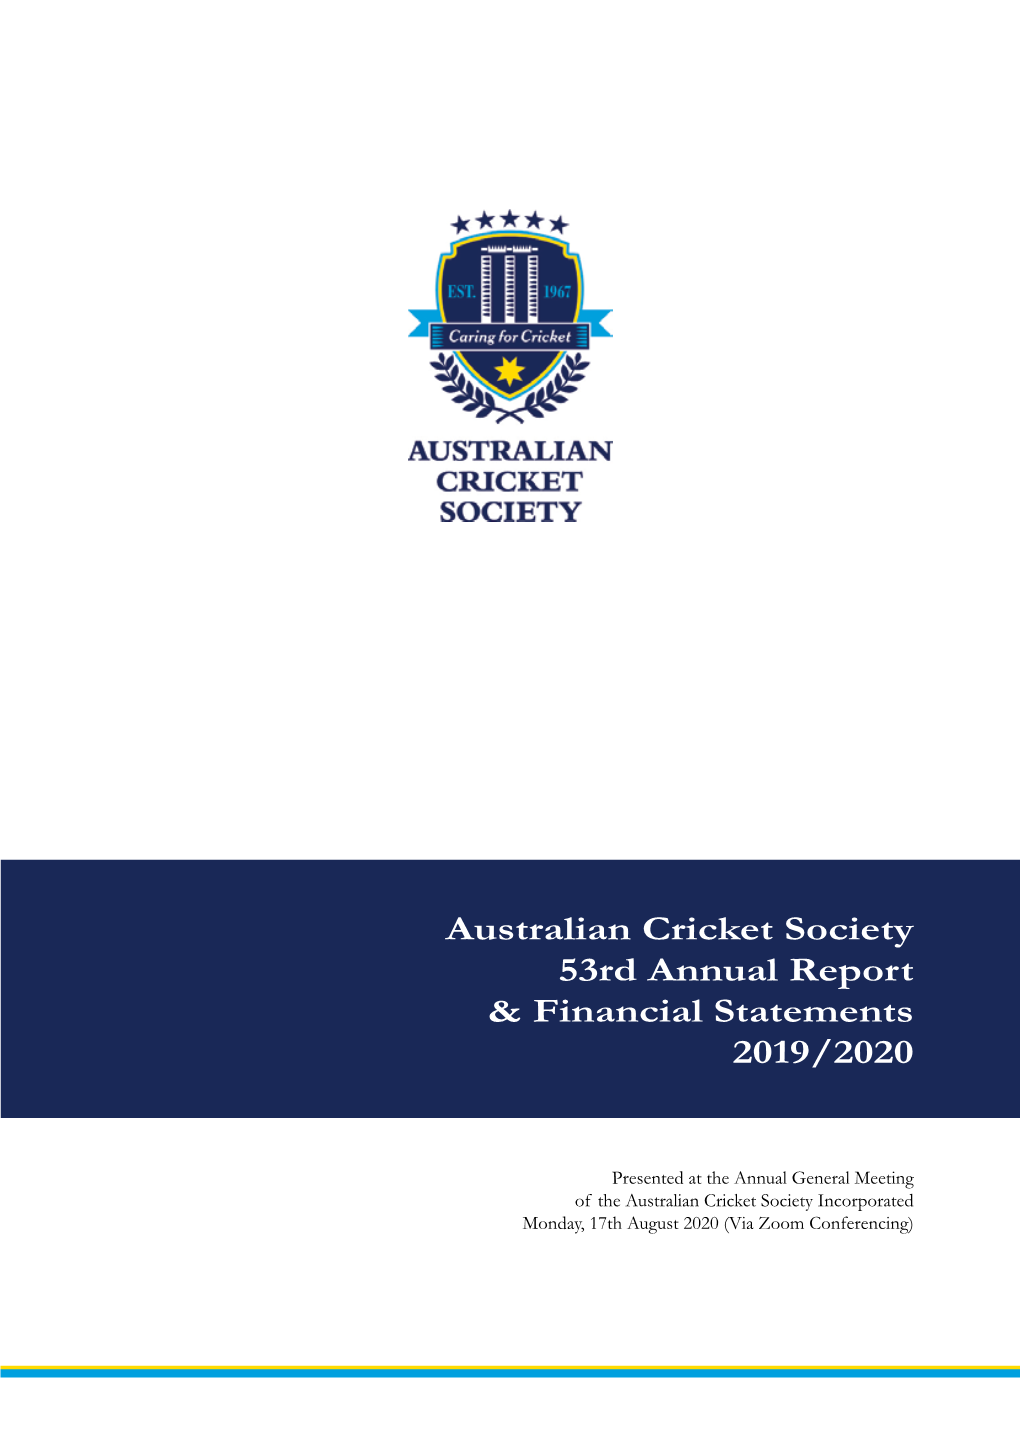 Australian Cricket Society 53Rd Annual Report & Financial Statements